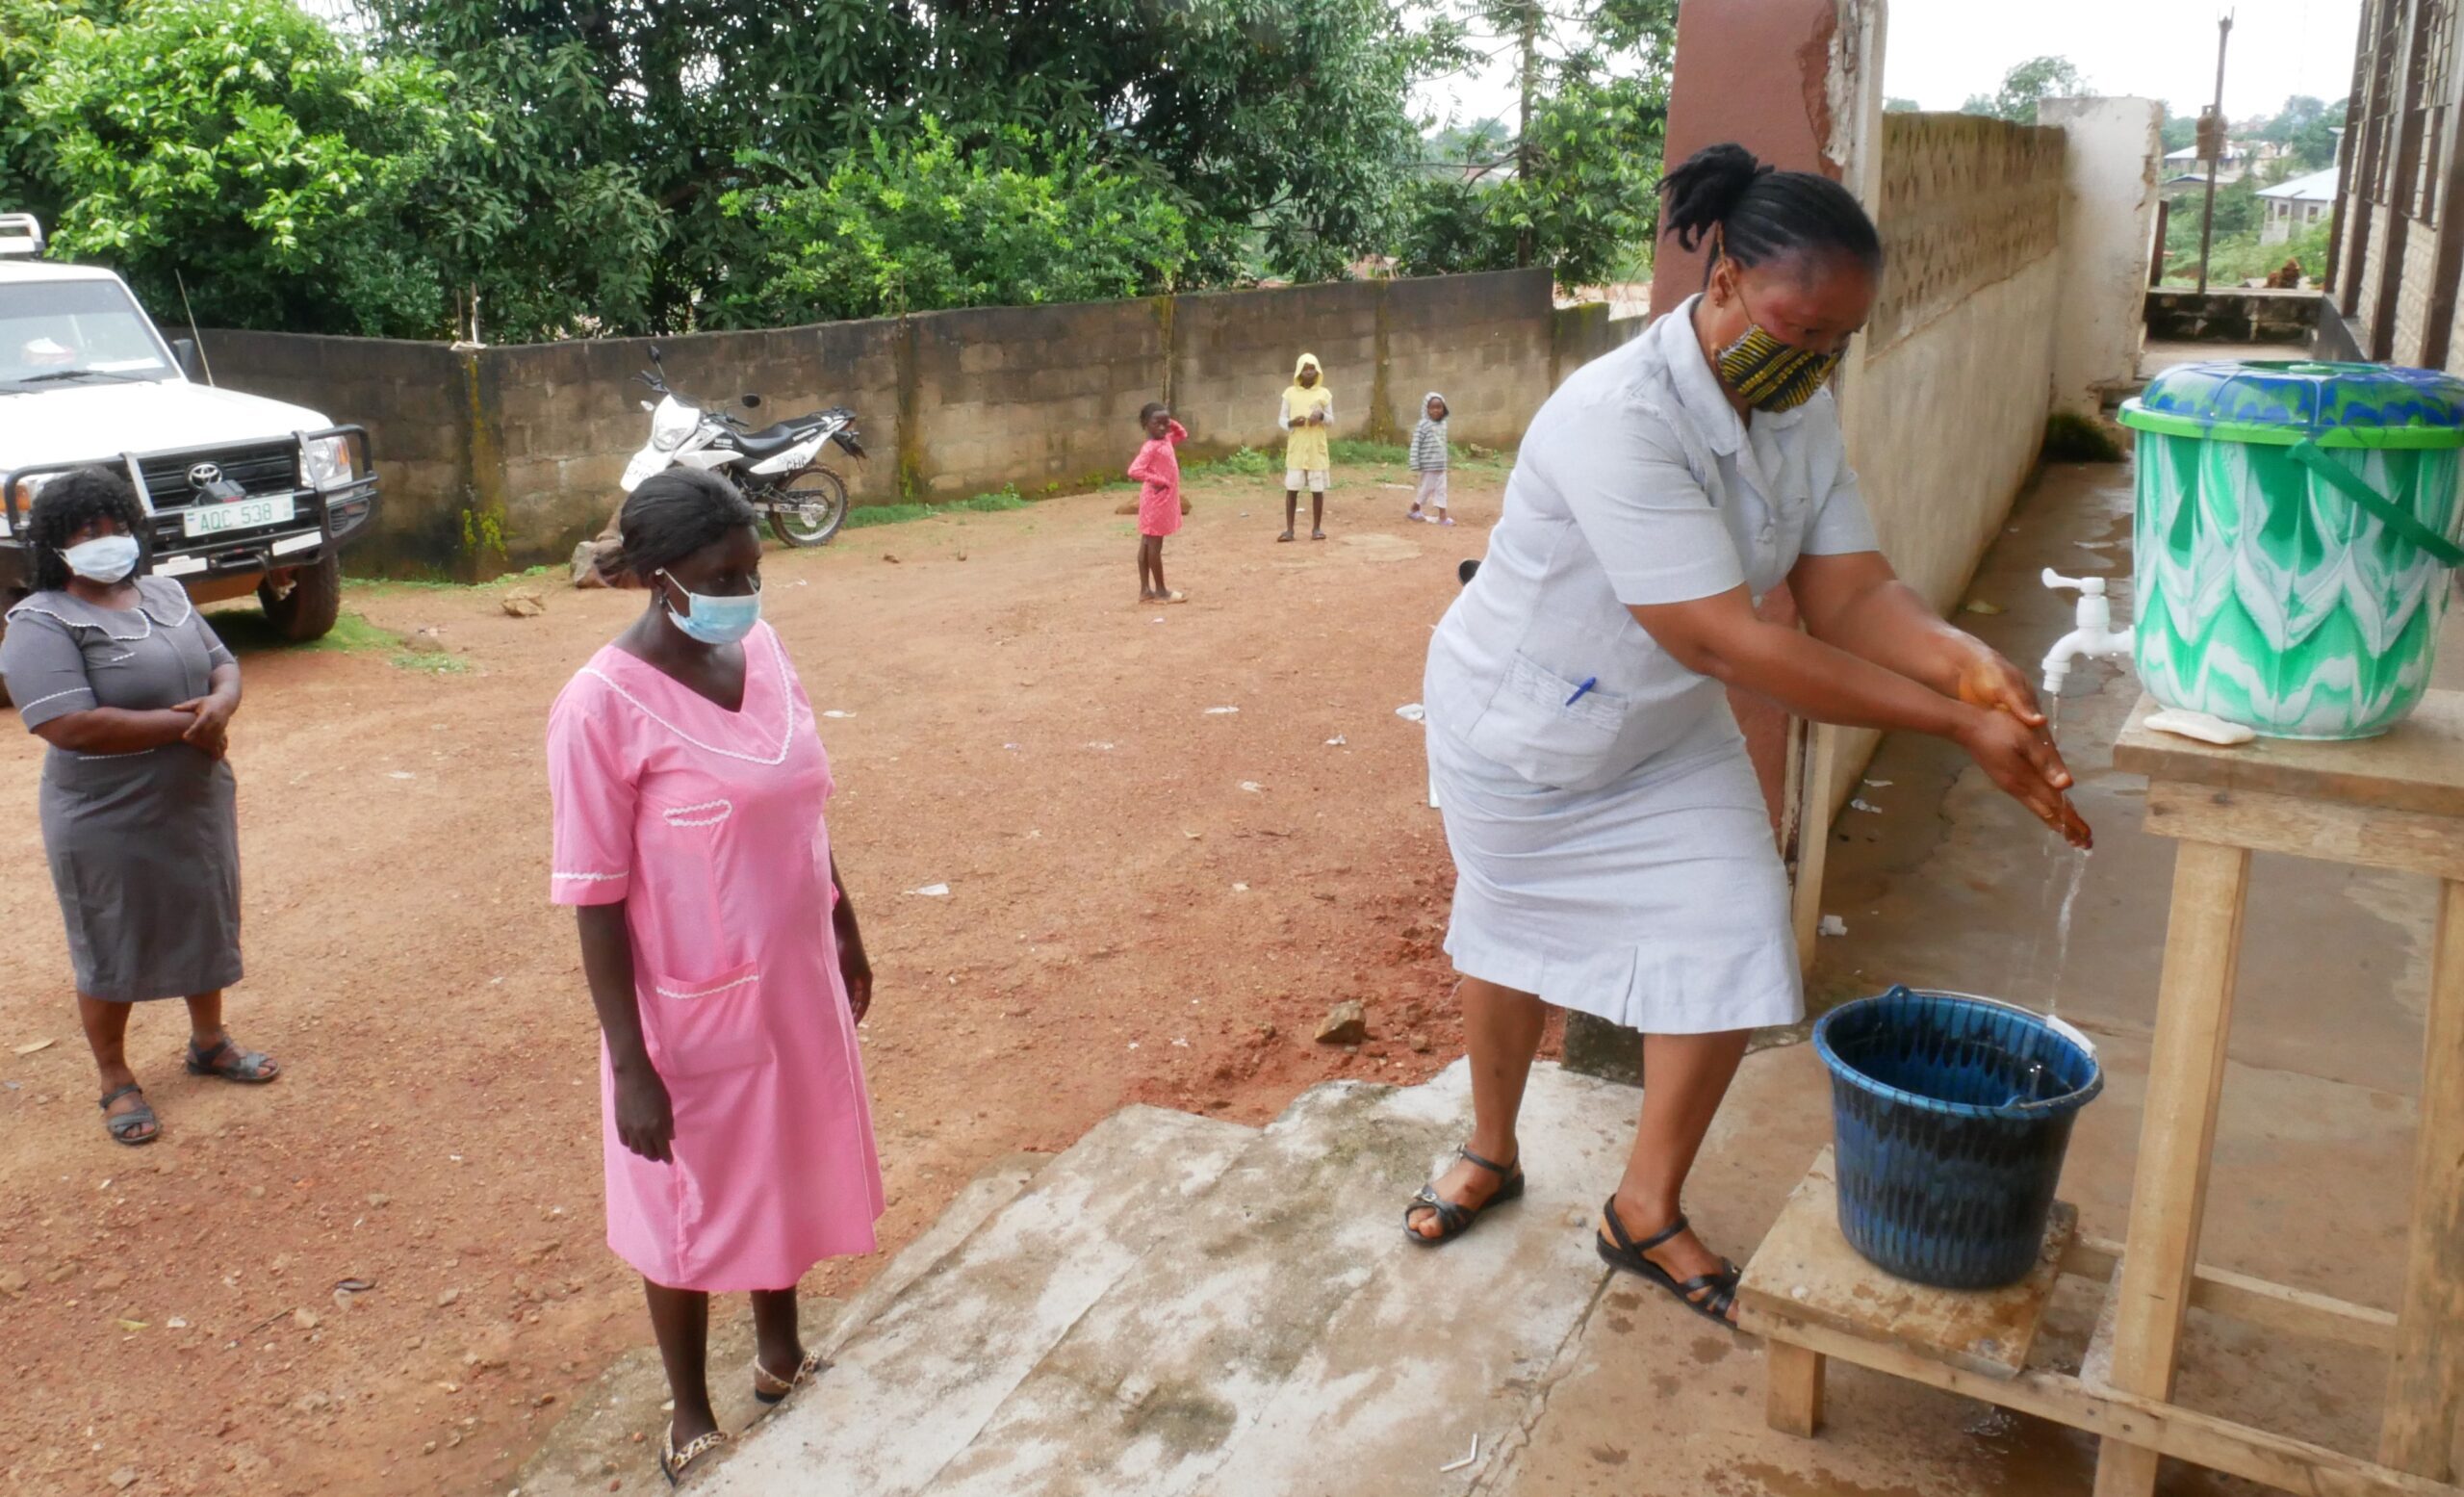 A health worker demonstrates how to use a handwashing station.